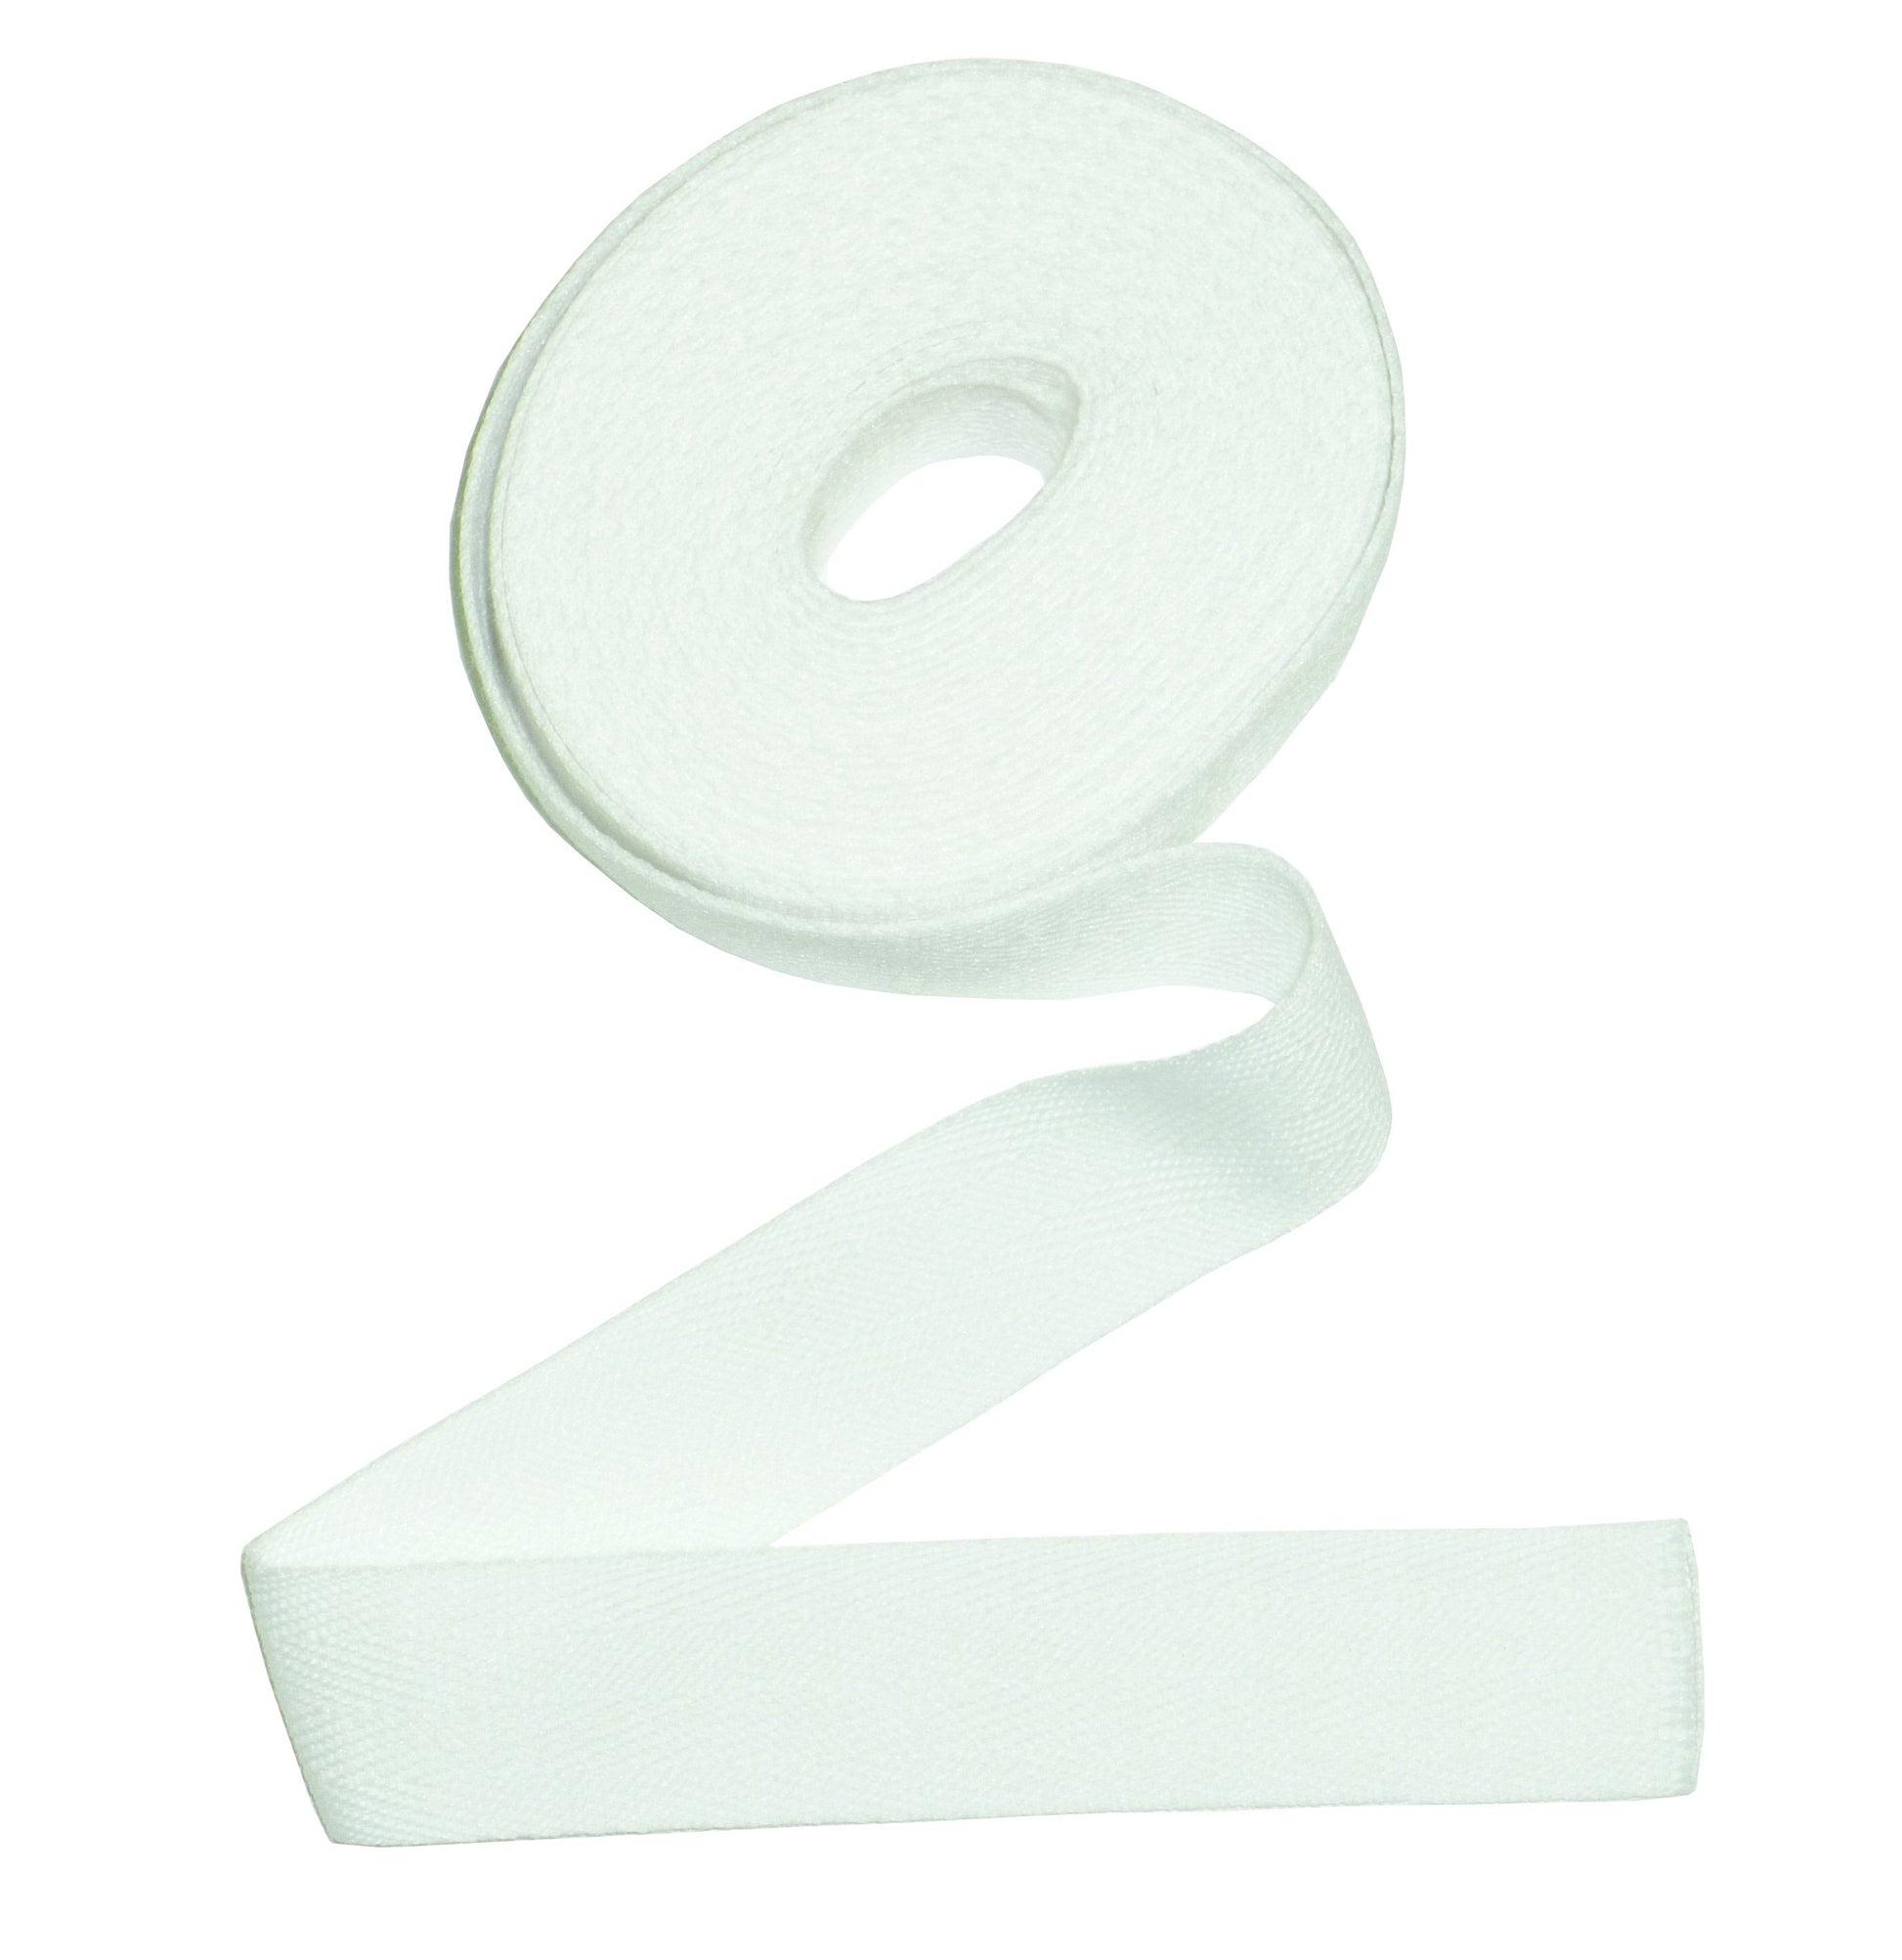 Benristraps 25mm Acrylic Twill Tape, 5 Metre Length in white